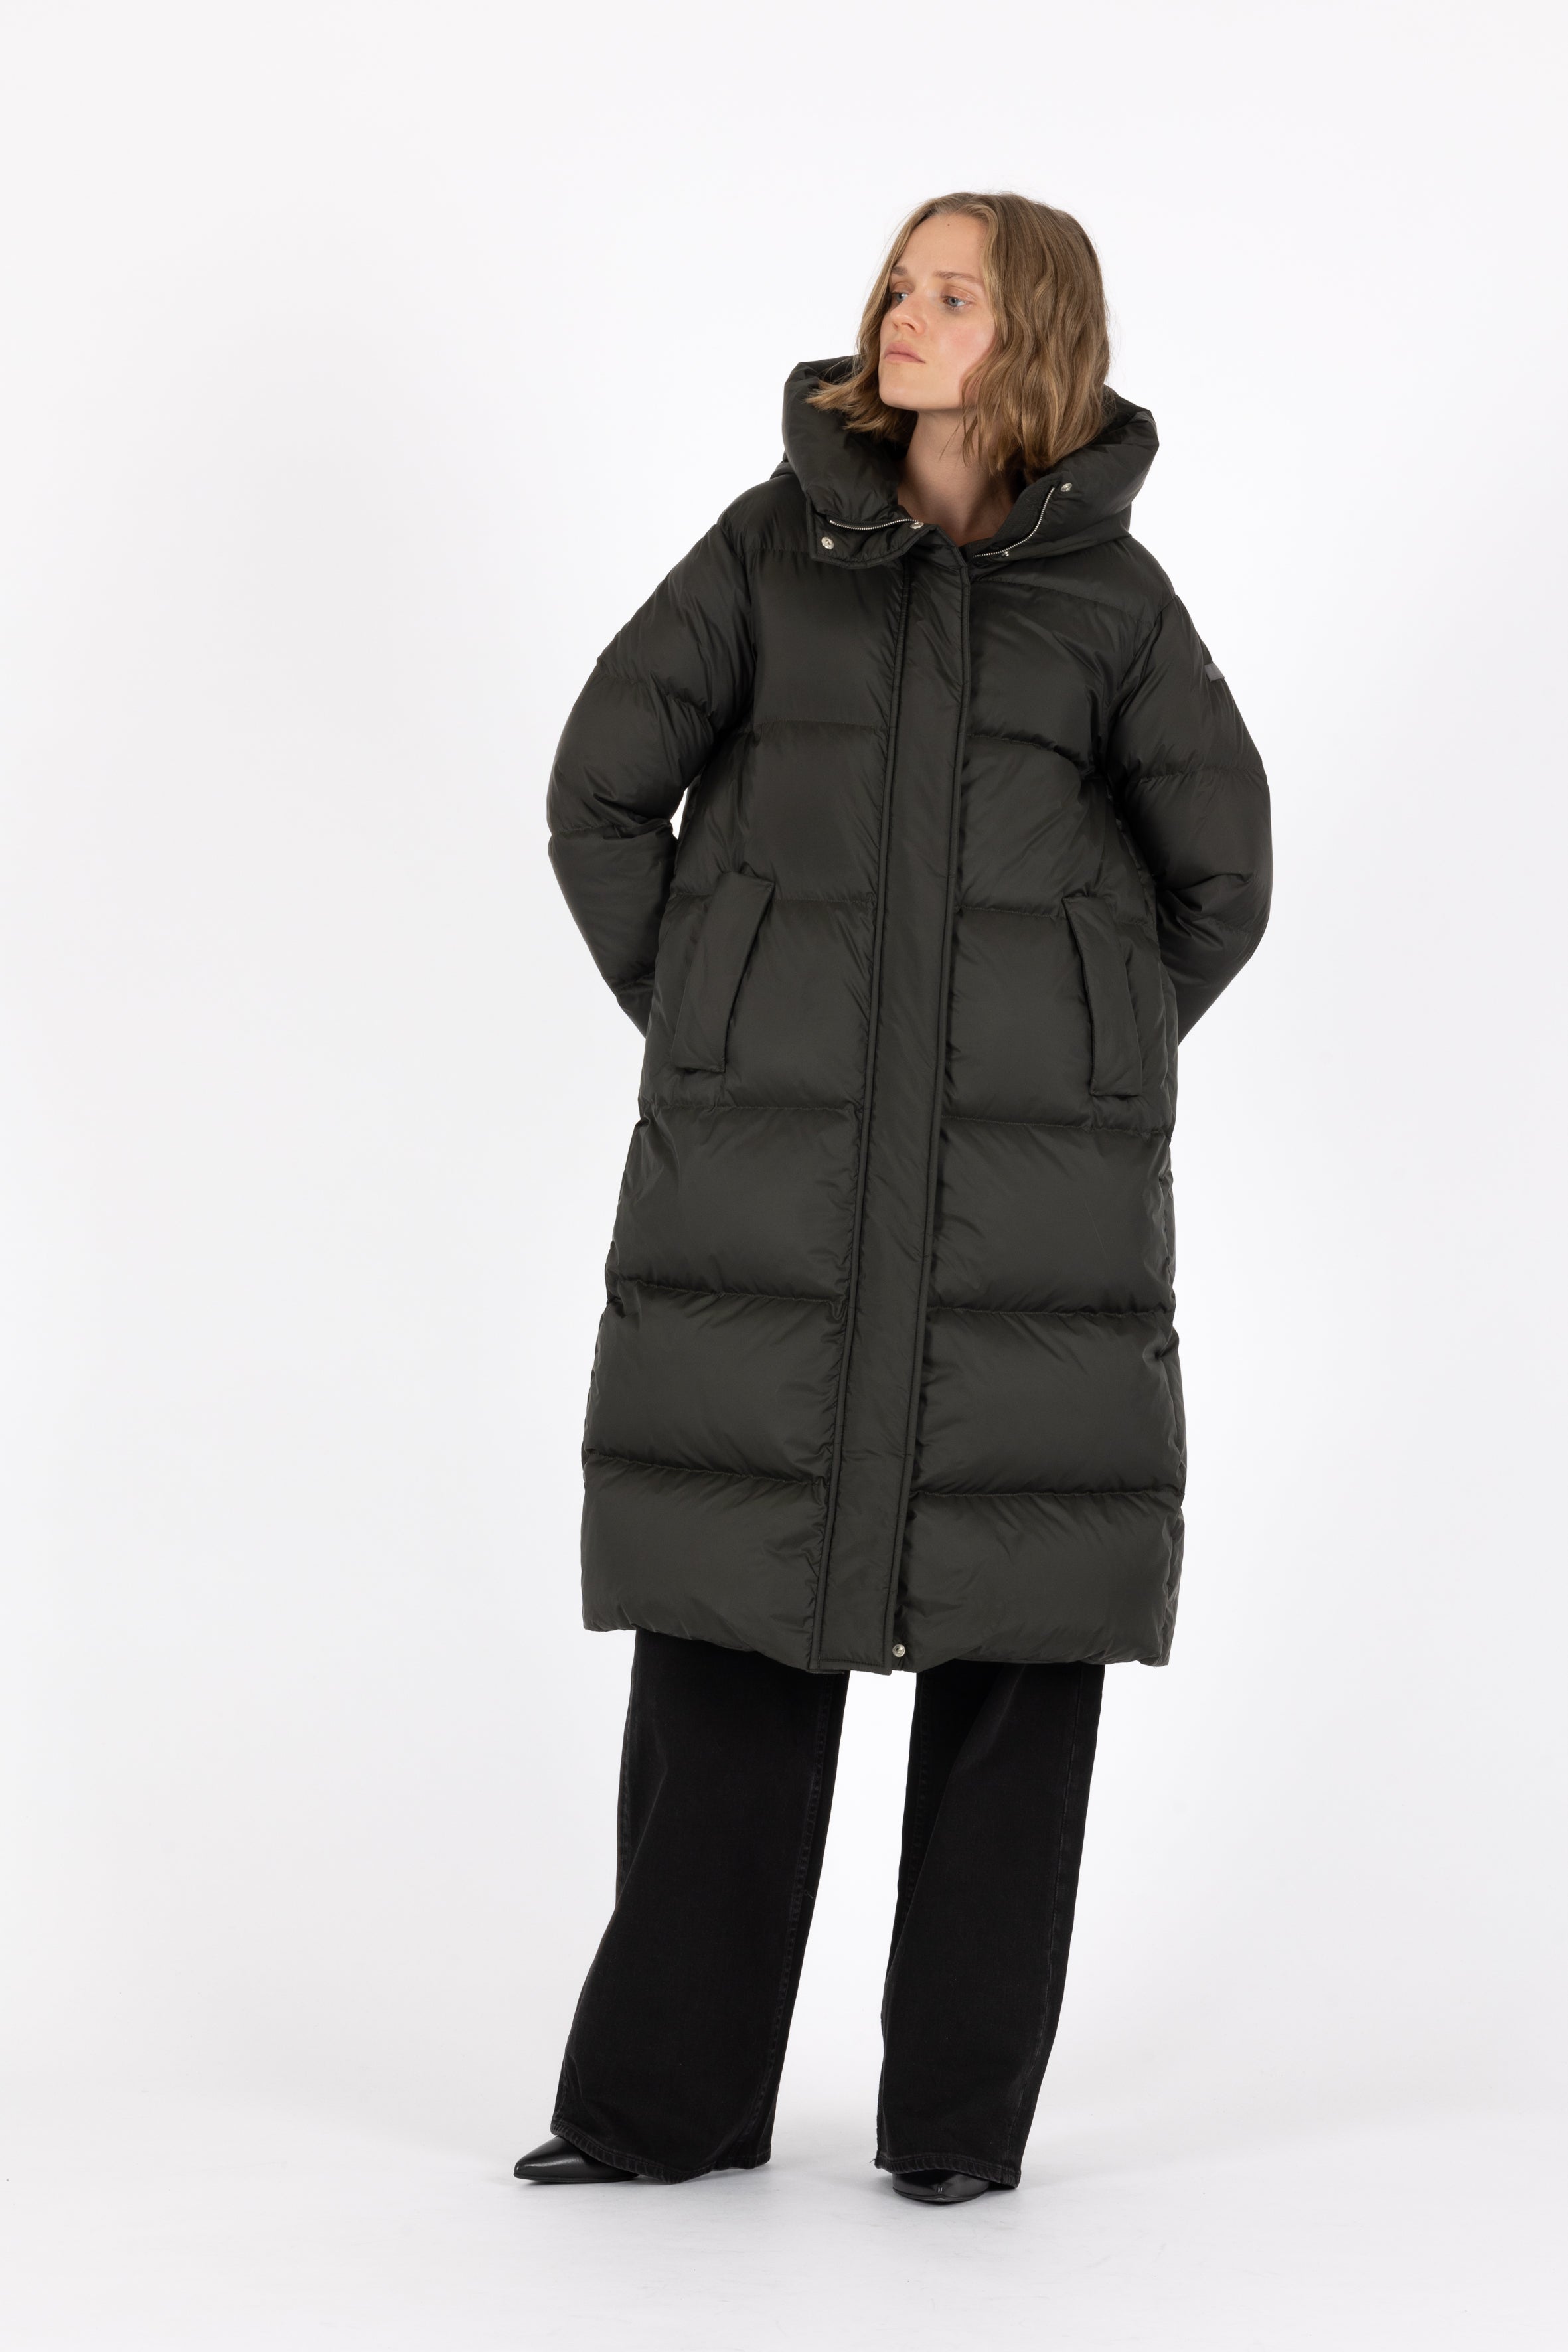 Long hooded Lempelius downcoat with a slim sihouette